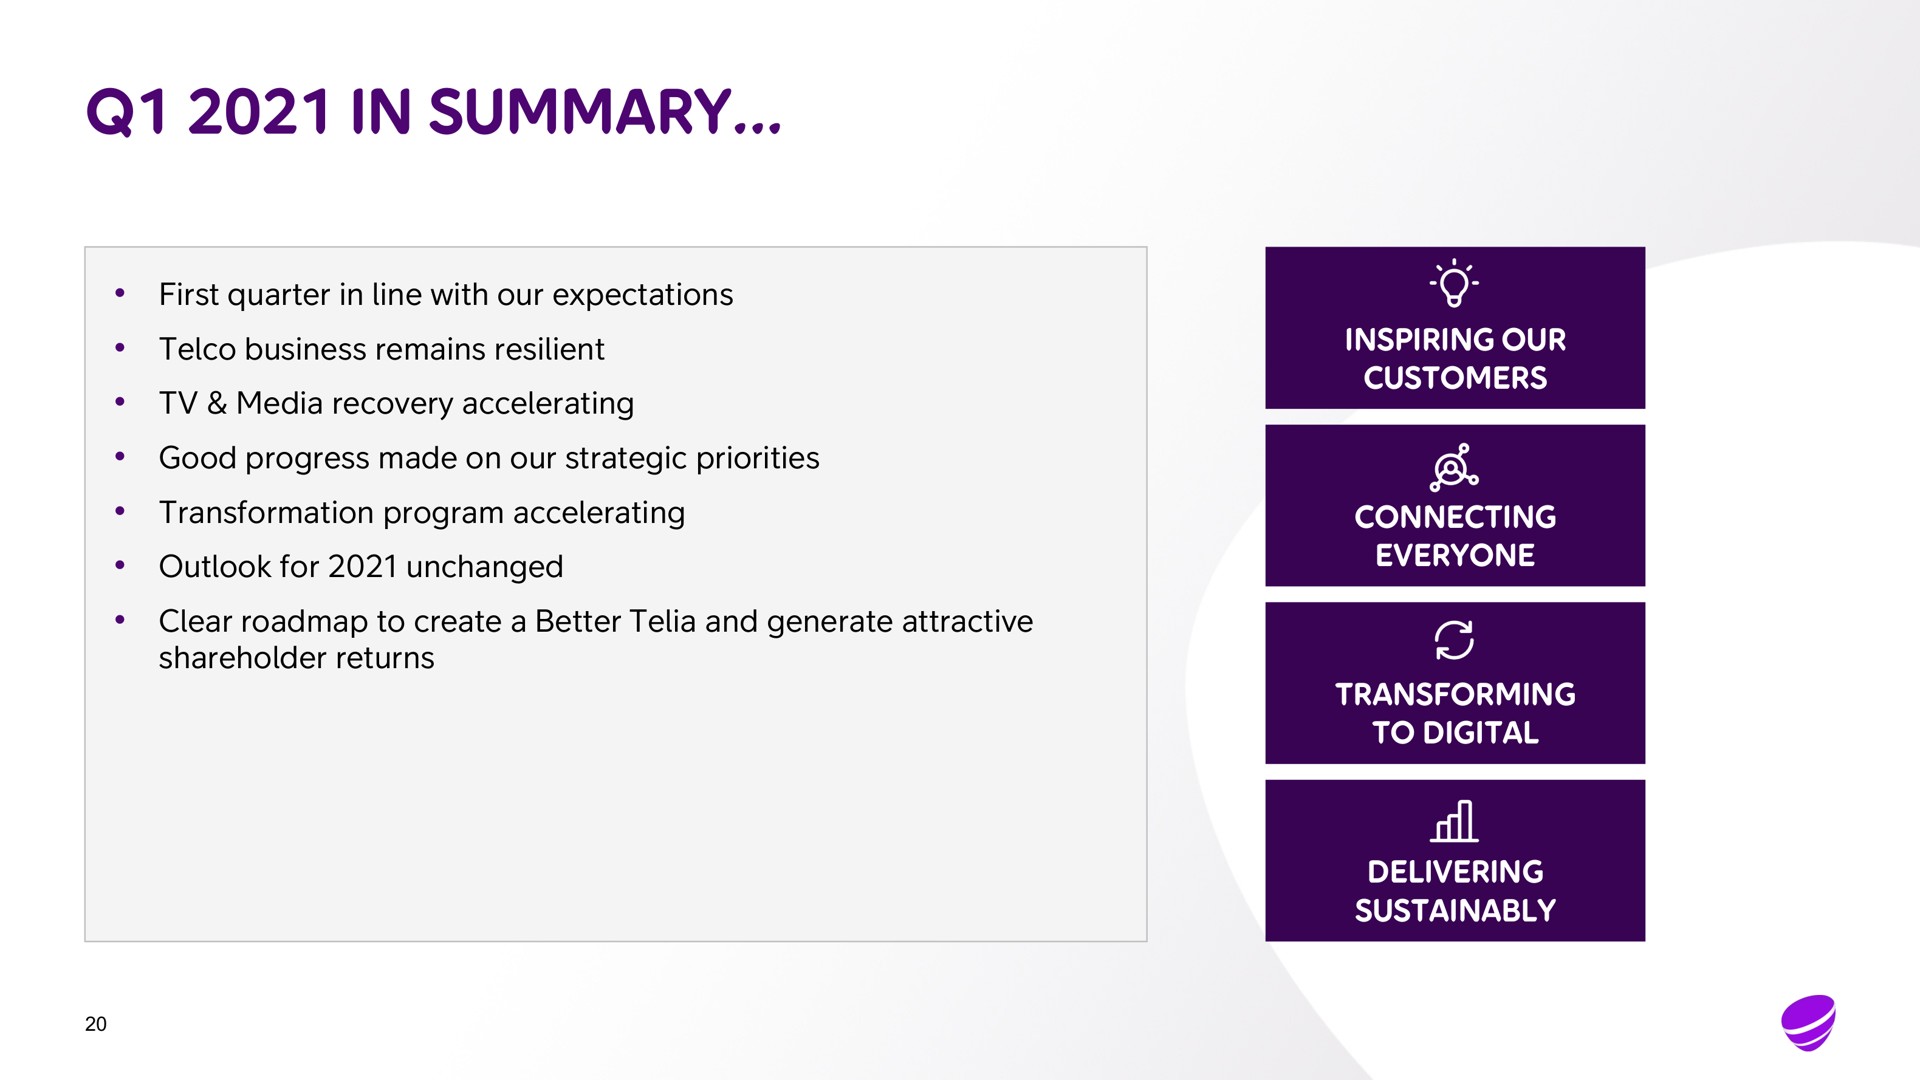 in summary first quarter in line with our expectations business remains resilient media recovery accelerating good progress made on our strategic priorities transformation program accelerating outlook for unchanged clear to create a better and generate attractive shareholder returns inspiring our customers connecting everyone transforming to digital delivering all | Telia Company